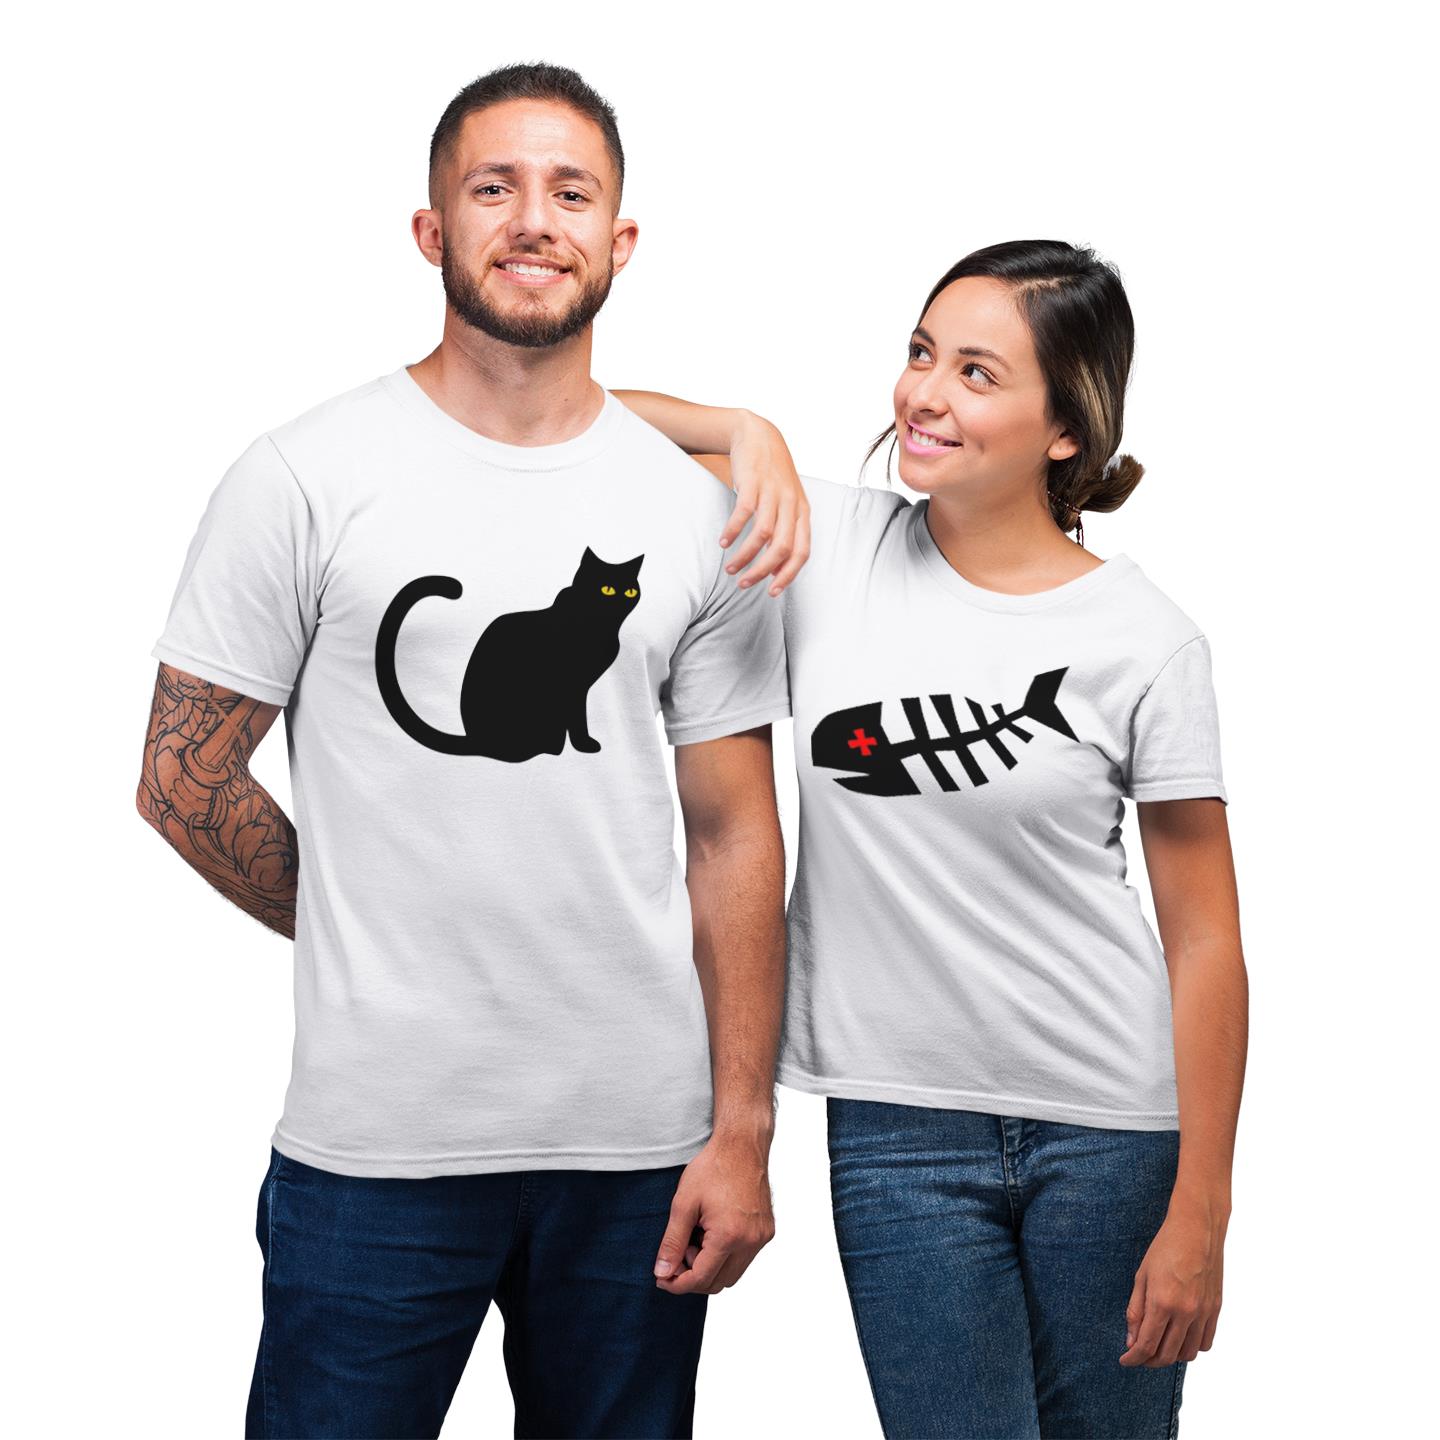 I Love You Like Cat Love Fish Shirt For Couples Matching T-shirt